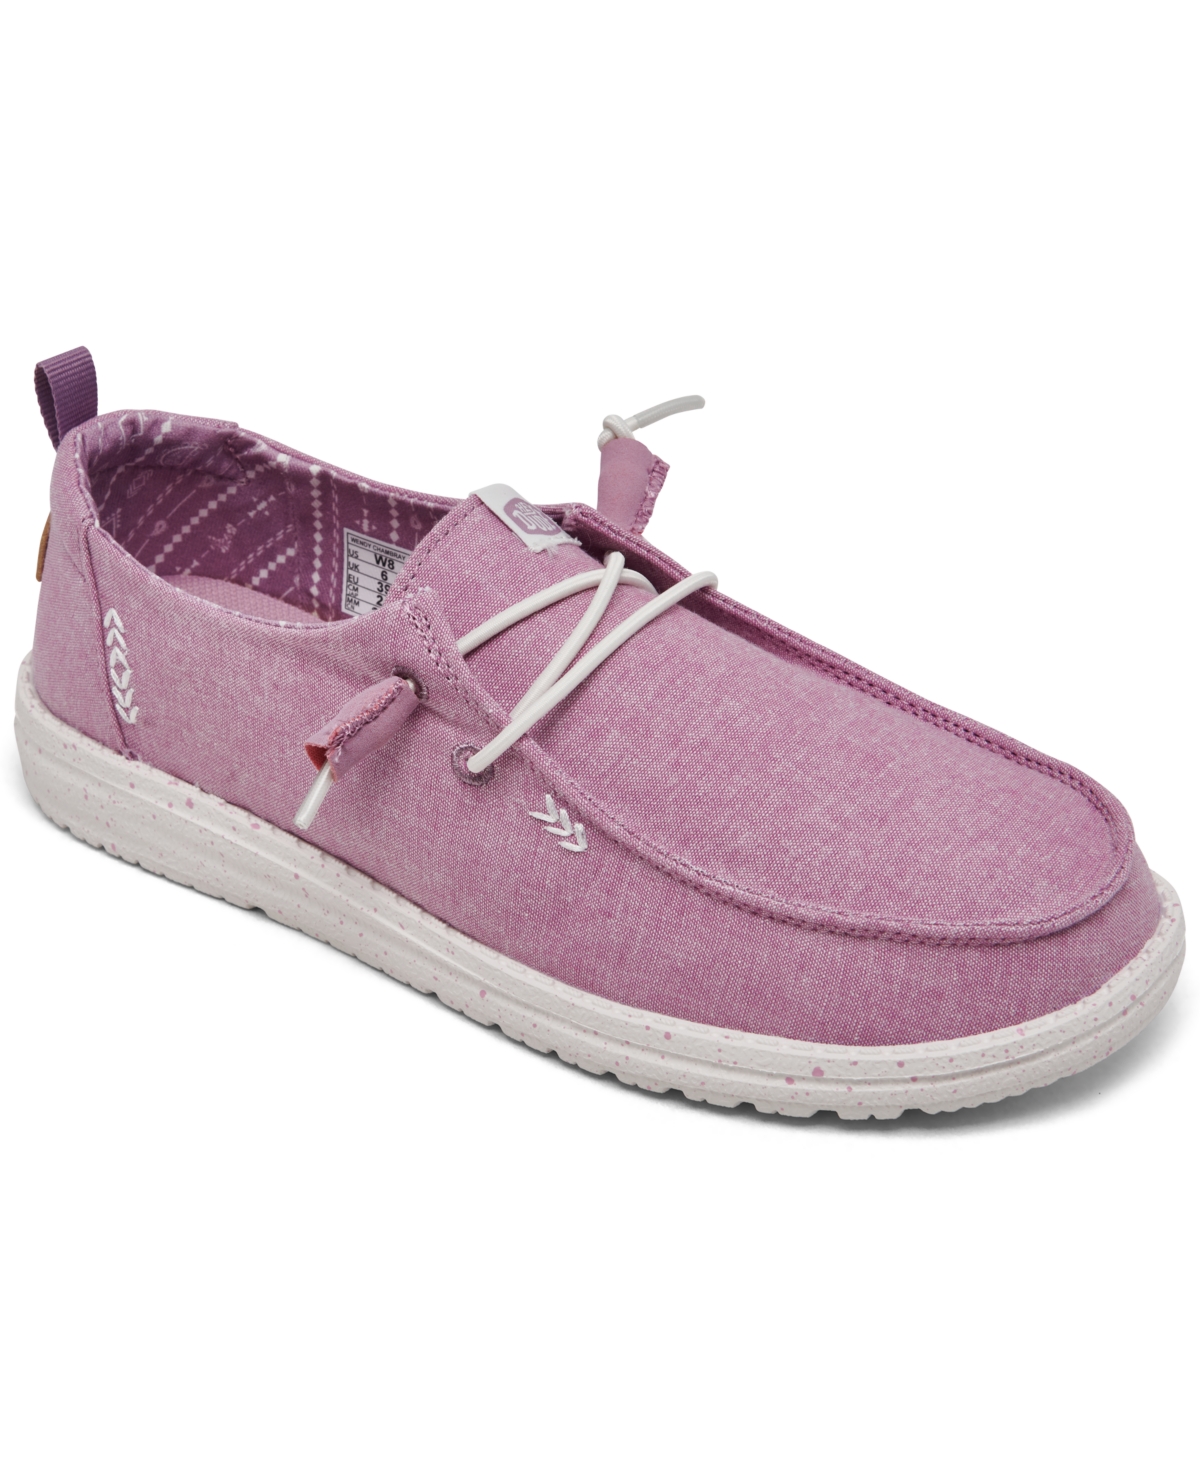 Women's Wendy Chambray Casual Sneakers from Finish Line - Pink